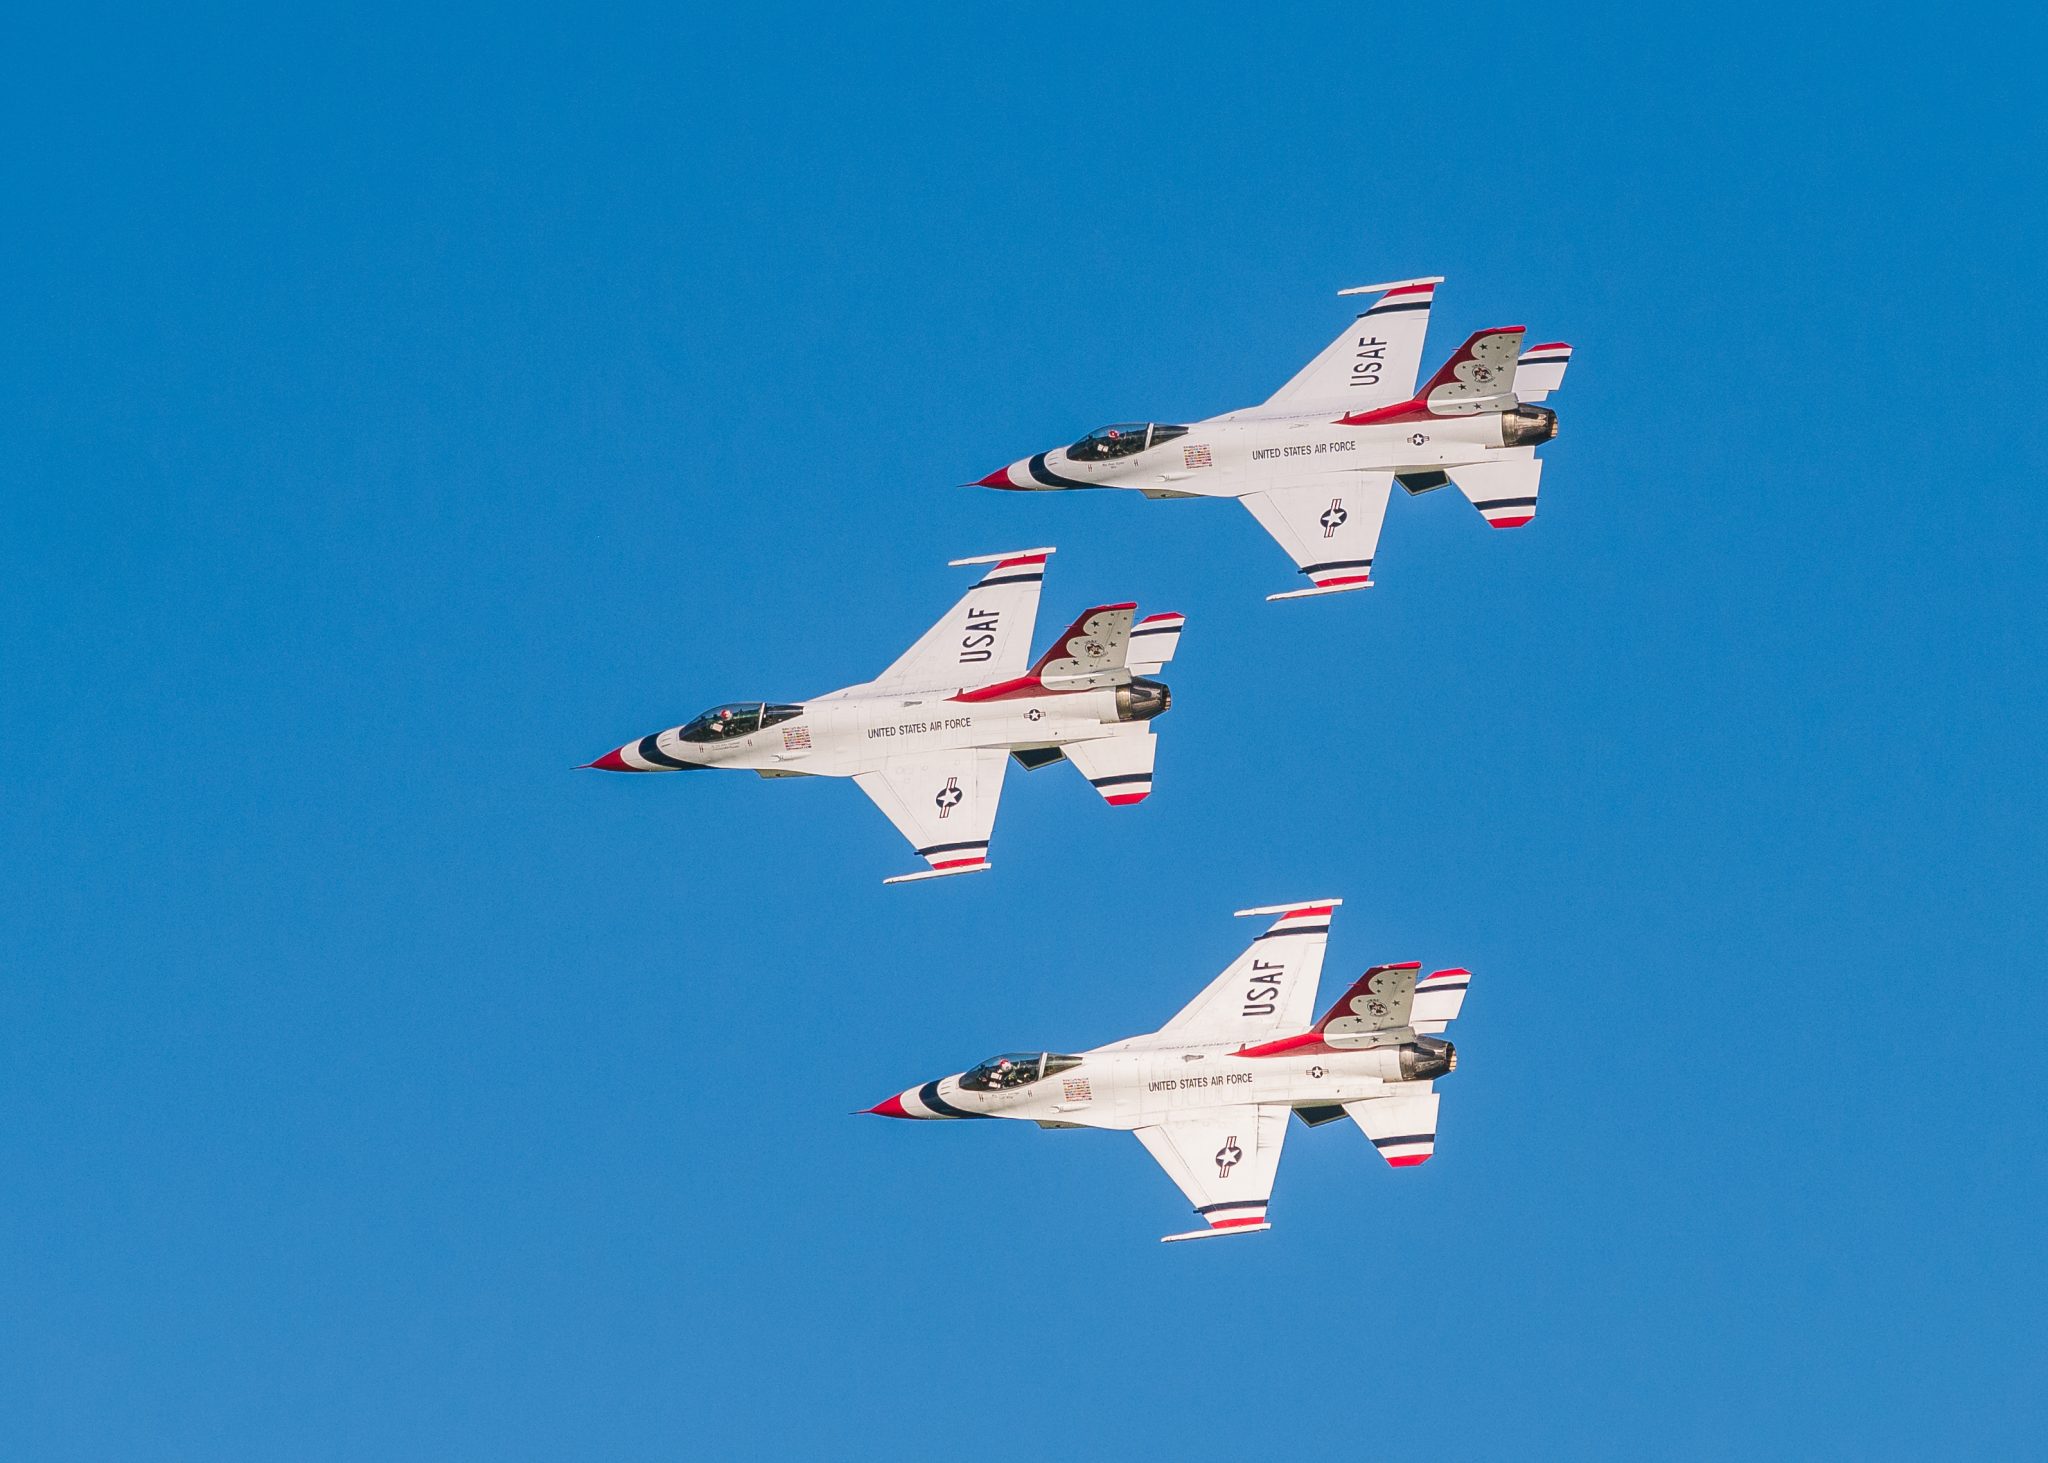 United States Air Force jets flying in formation at an air show